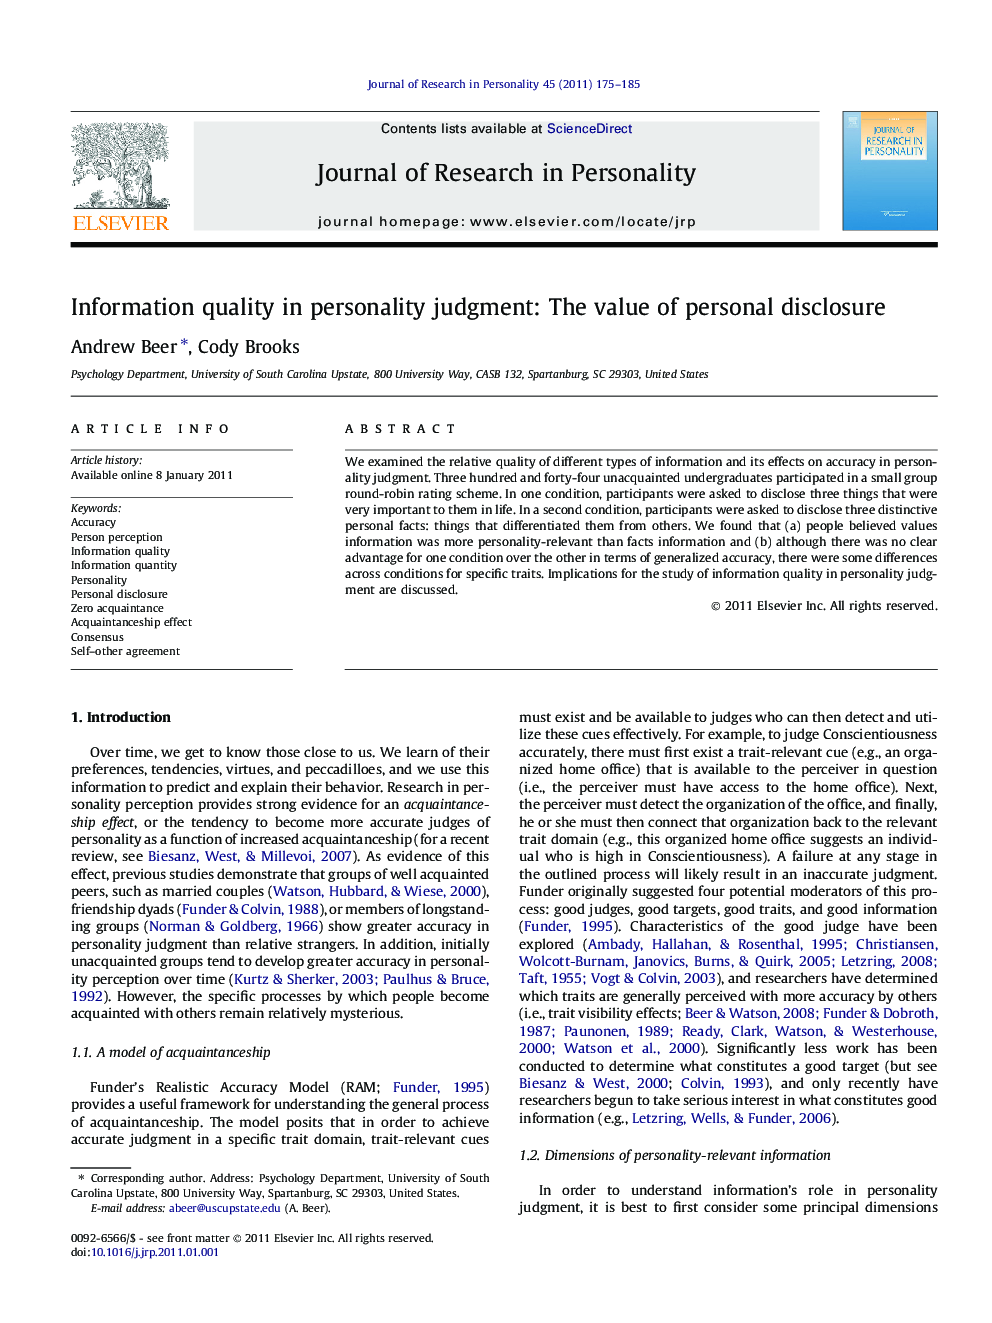 Information quality in personality judgment: The value of personal disclosure